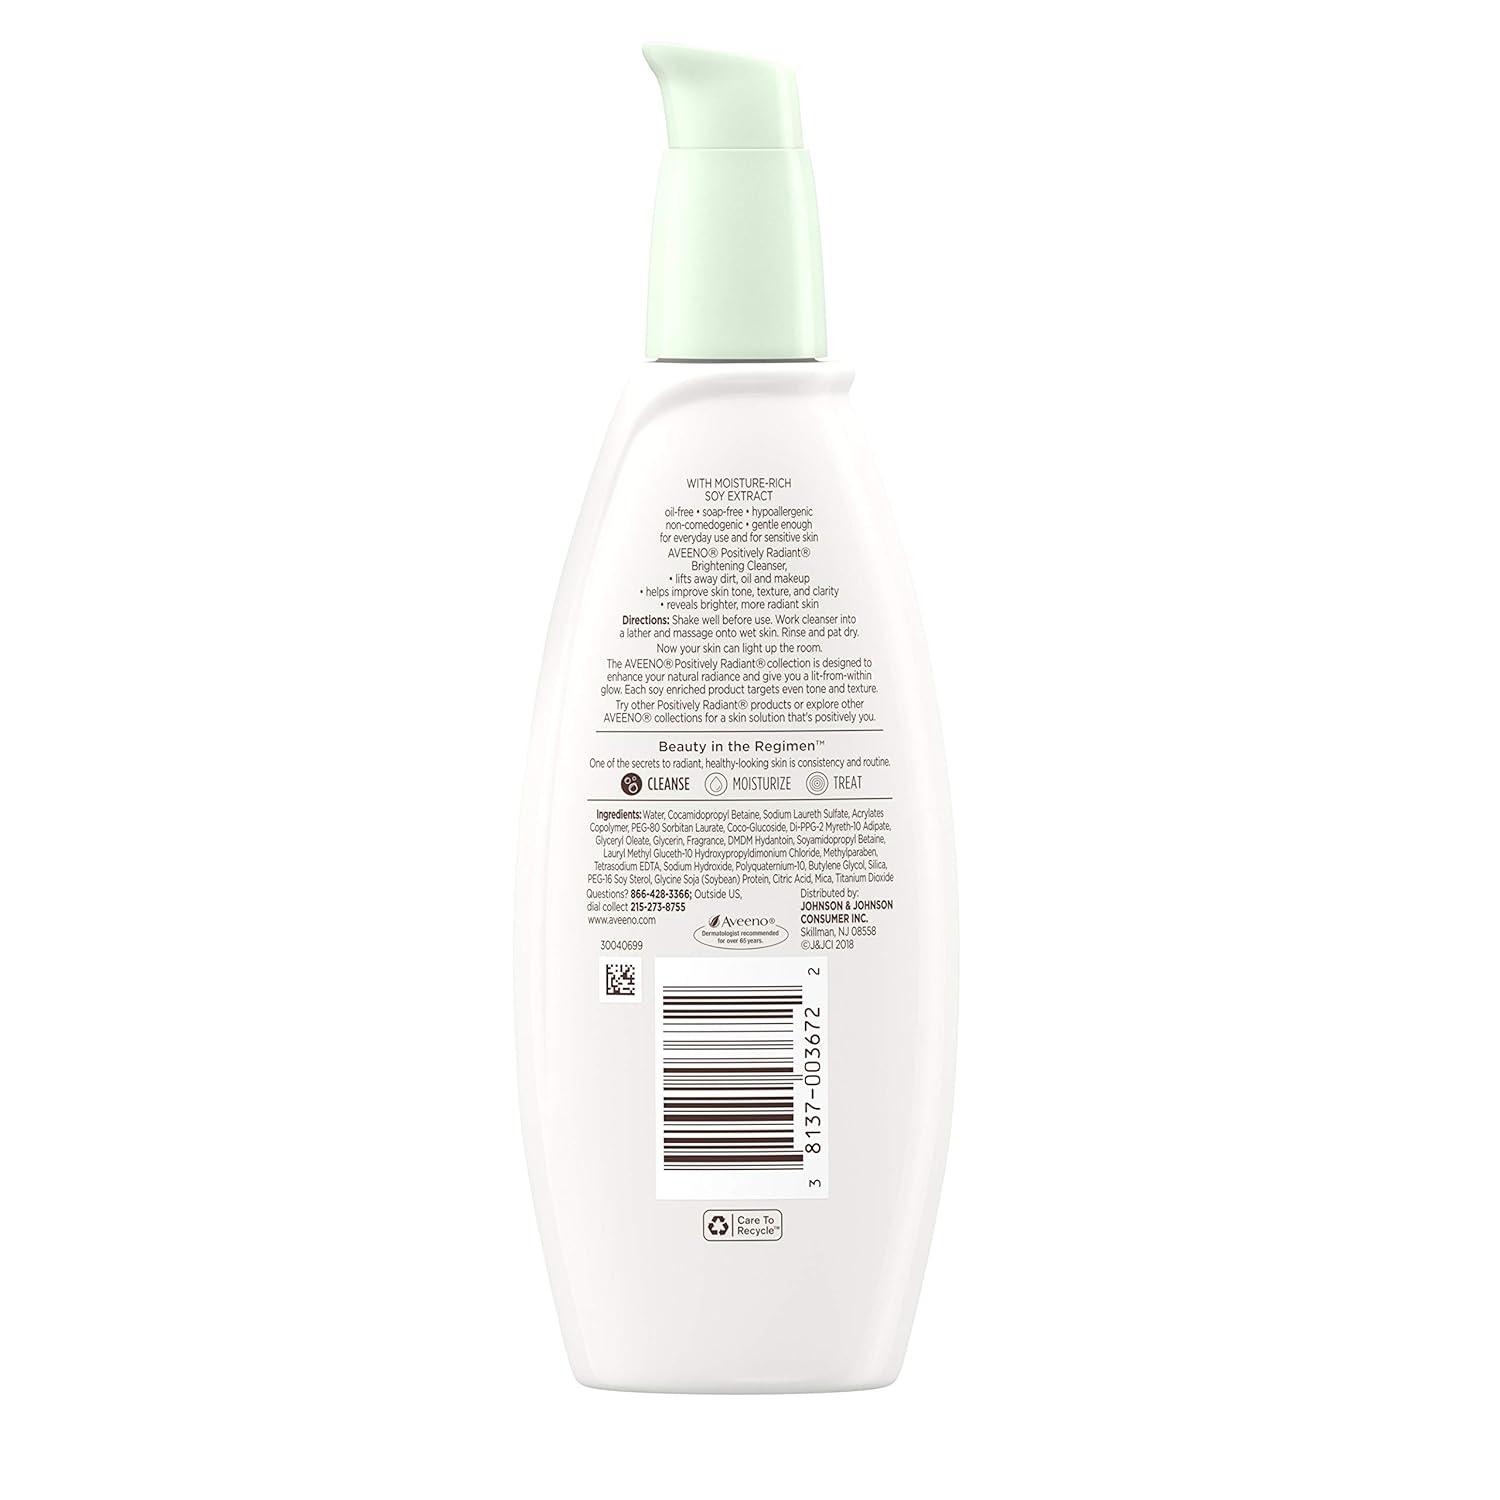 Discontinued POSITIVELY RADIANT® Micellar Gel Cleanser For Moisture